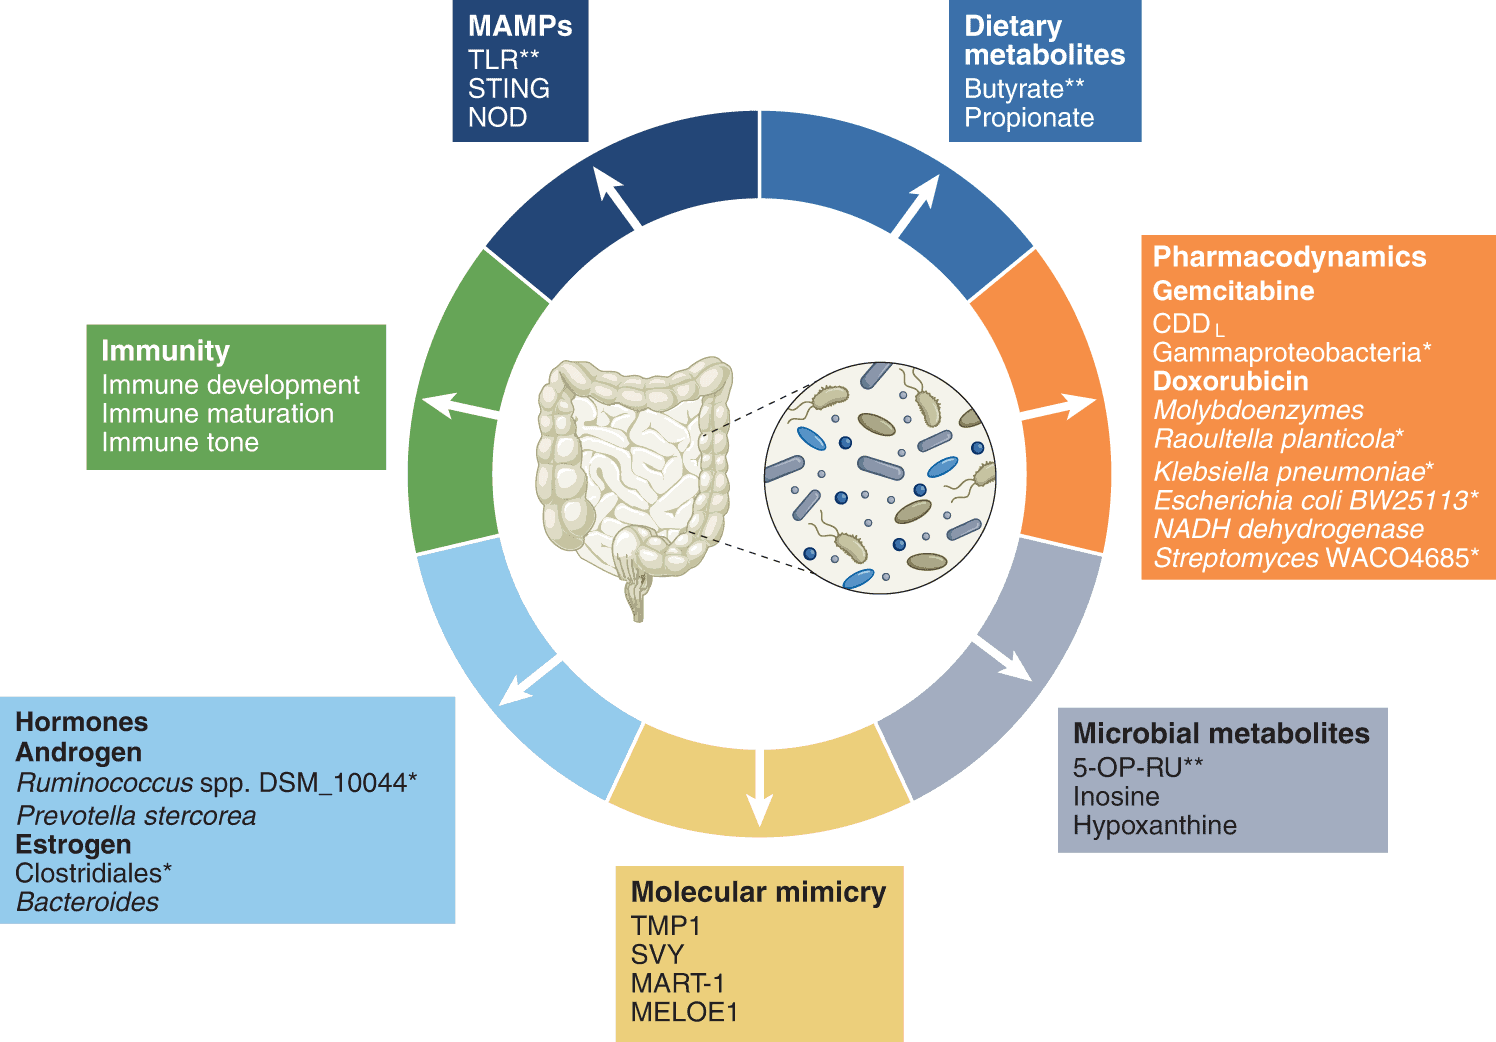 Targeting the Gut Microbiome for Therapeutic Interventions